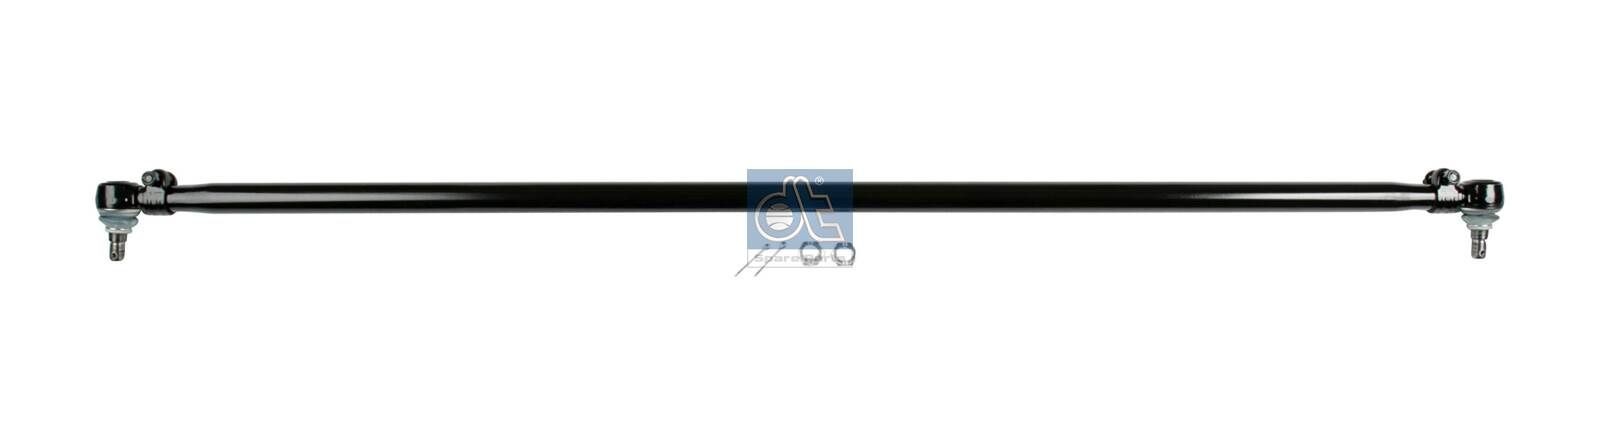 DT Spare Parts 4.65330 Rod Assembly 669 330 0403